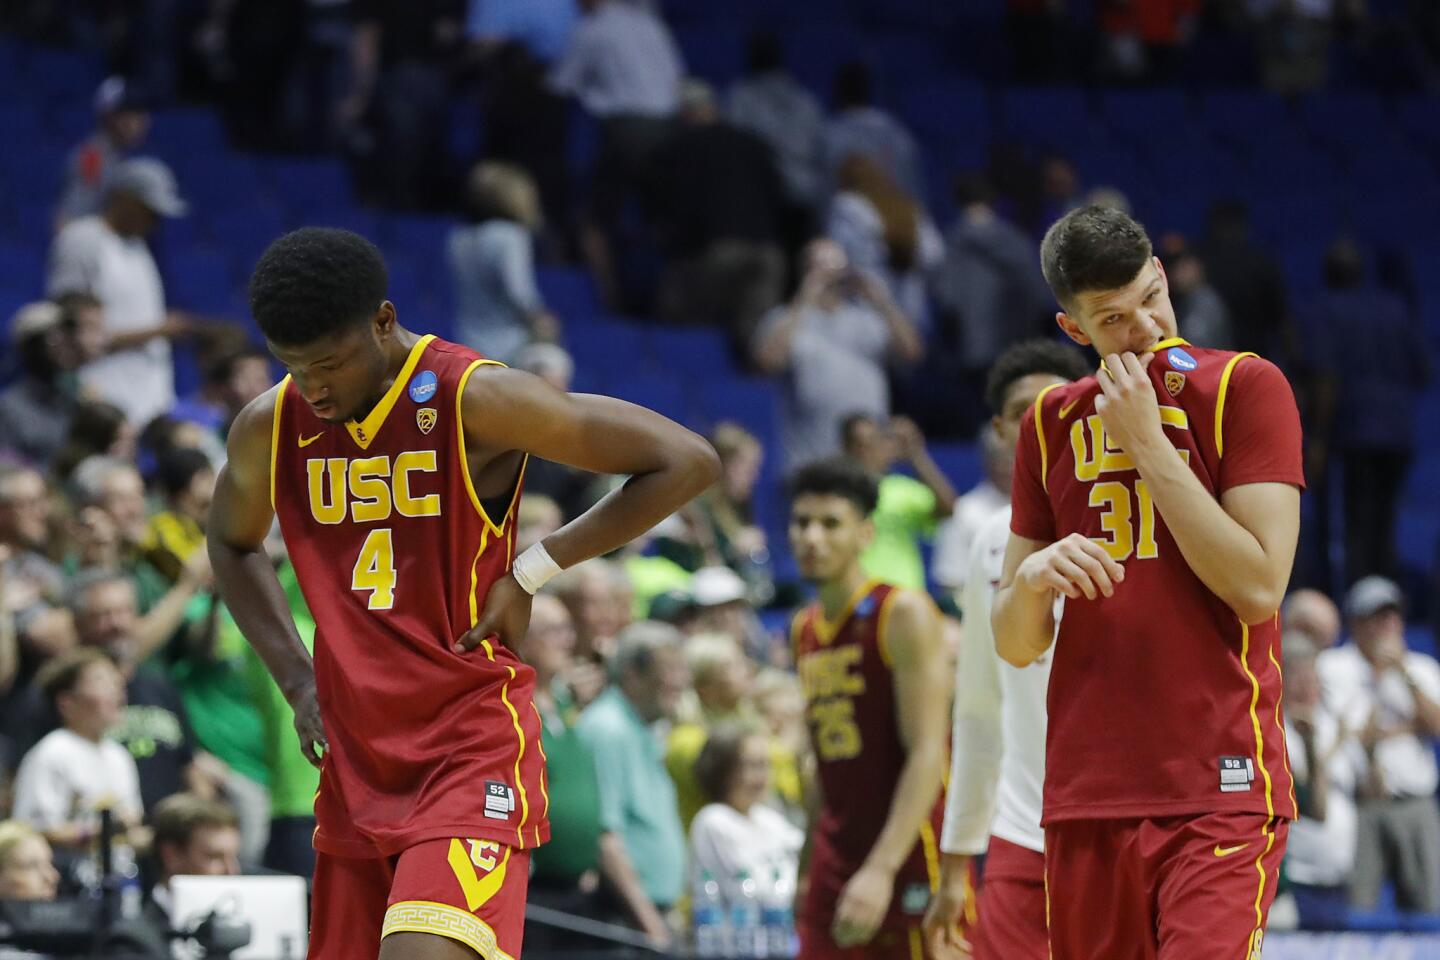 USC big men Chimezie Metu (4) and Nick Rakocevic (31) leave the court after their 82-78 loss to Baylor in an NCAA tournament second-round game Sunday.